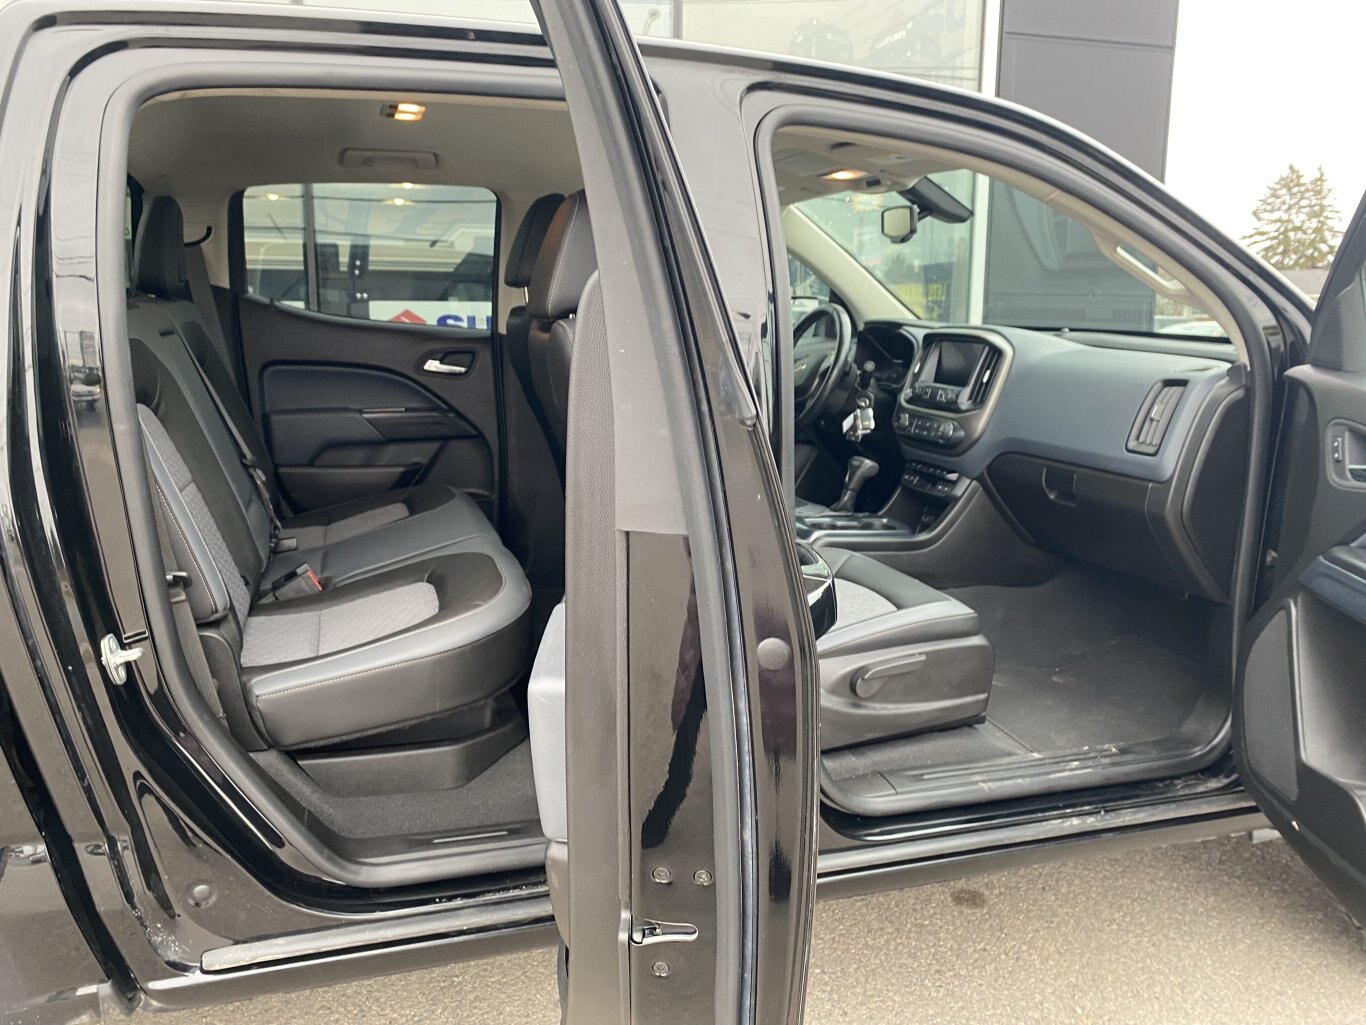 2021 CHEVROLET COLORADO Z71 4X4 CREWCAB WITH HEATED SEATS, HEATED STEERING WHEEL AND REAR VIEW CAMERA!!